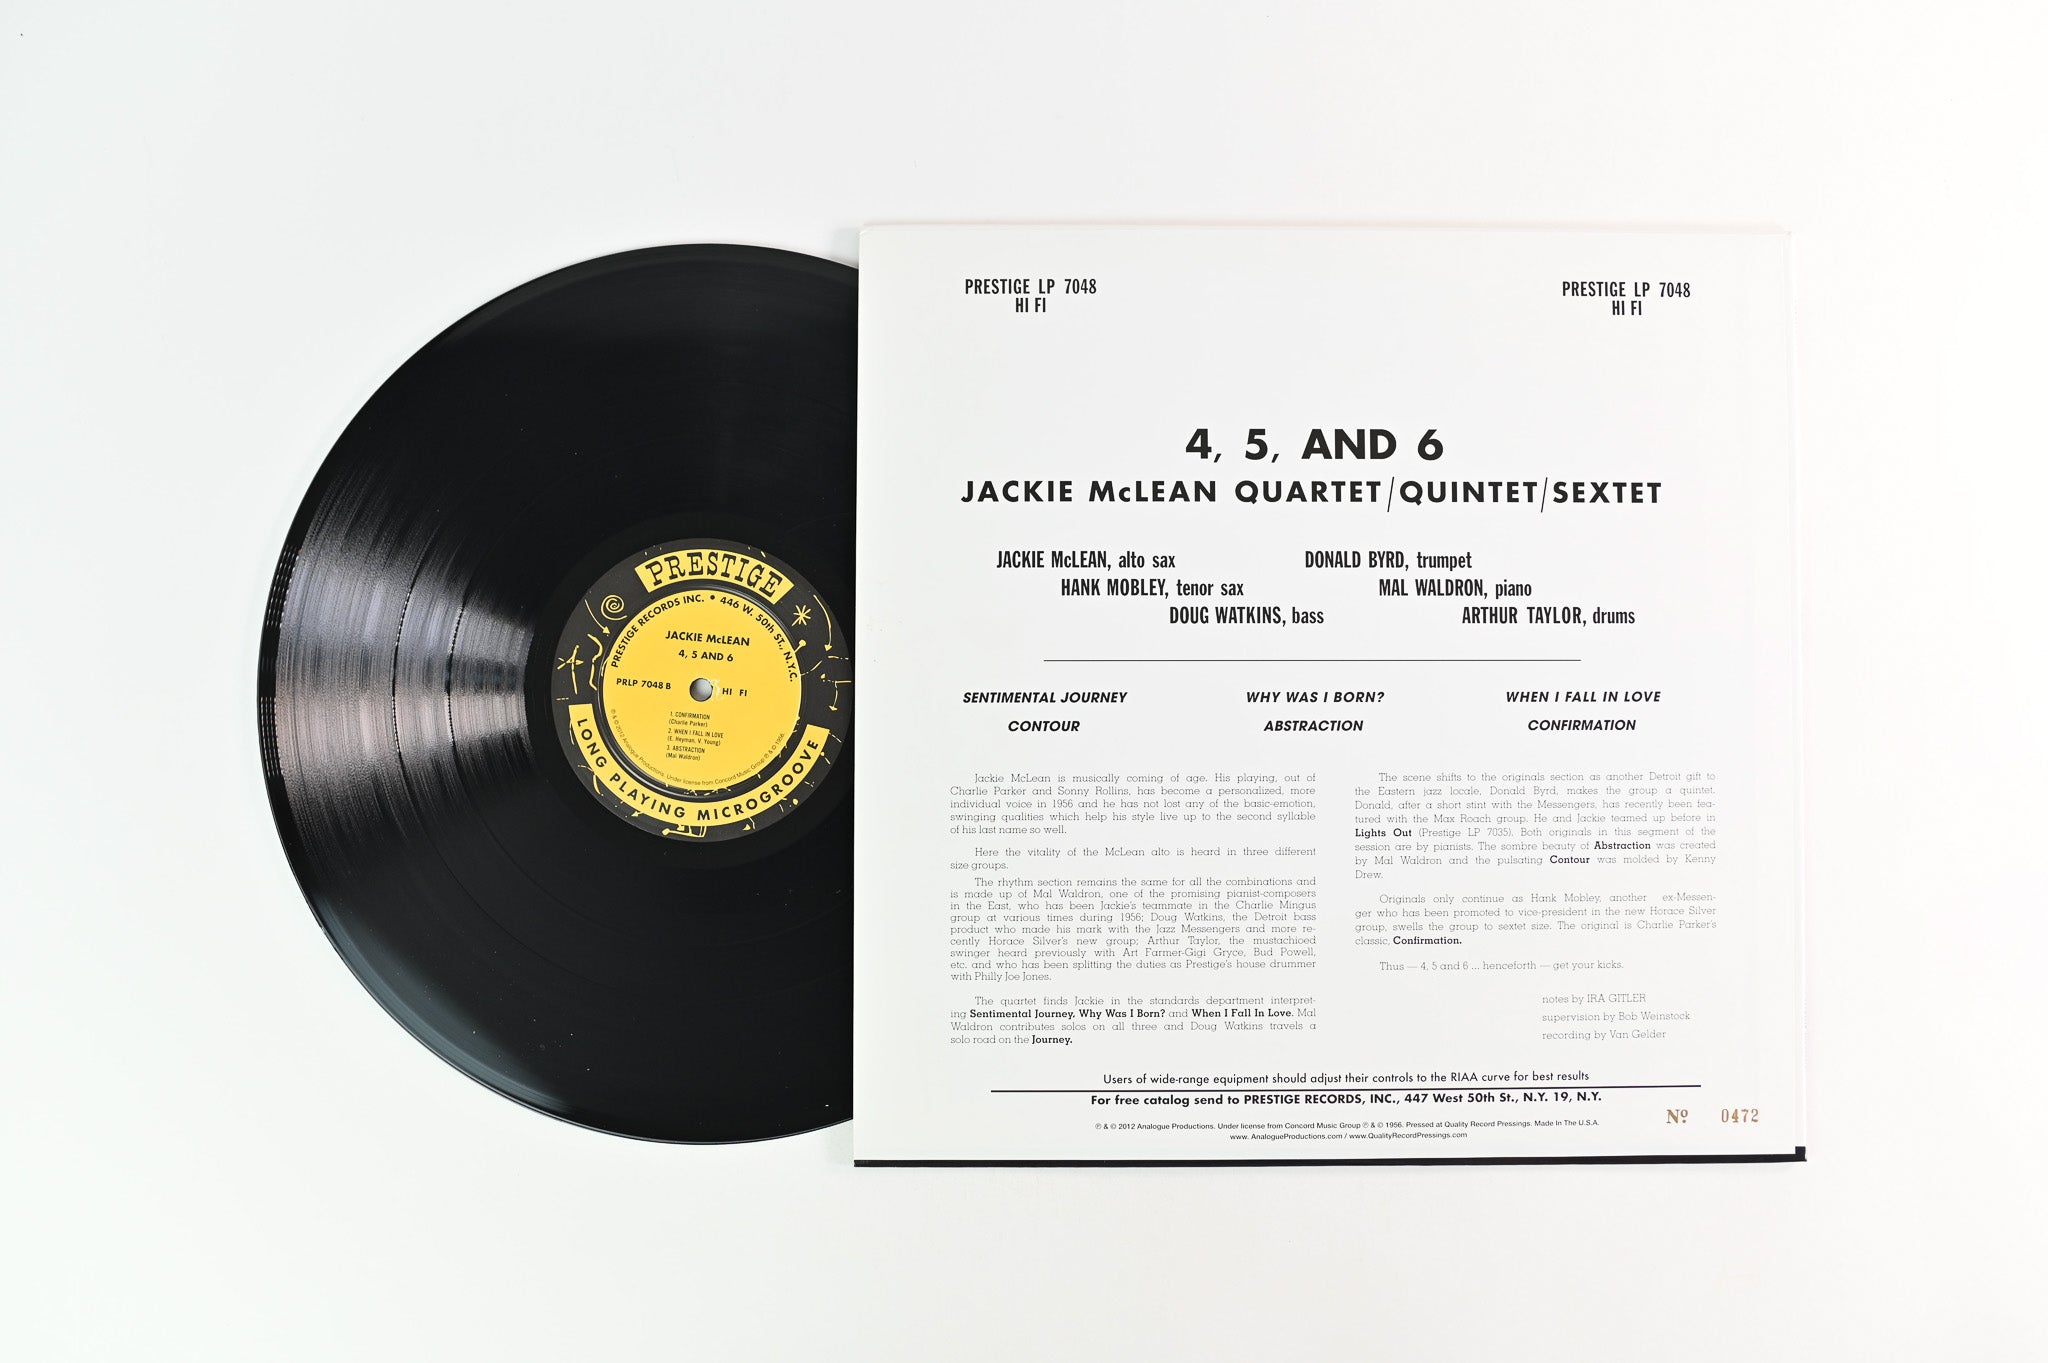 Jackie McLean - 4, 5 And 6 on Prestige Analogue Productions 200 Gram Reissue